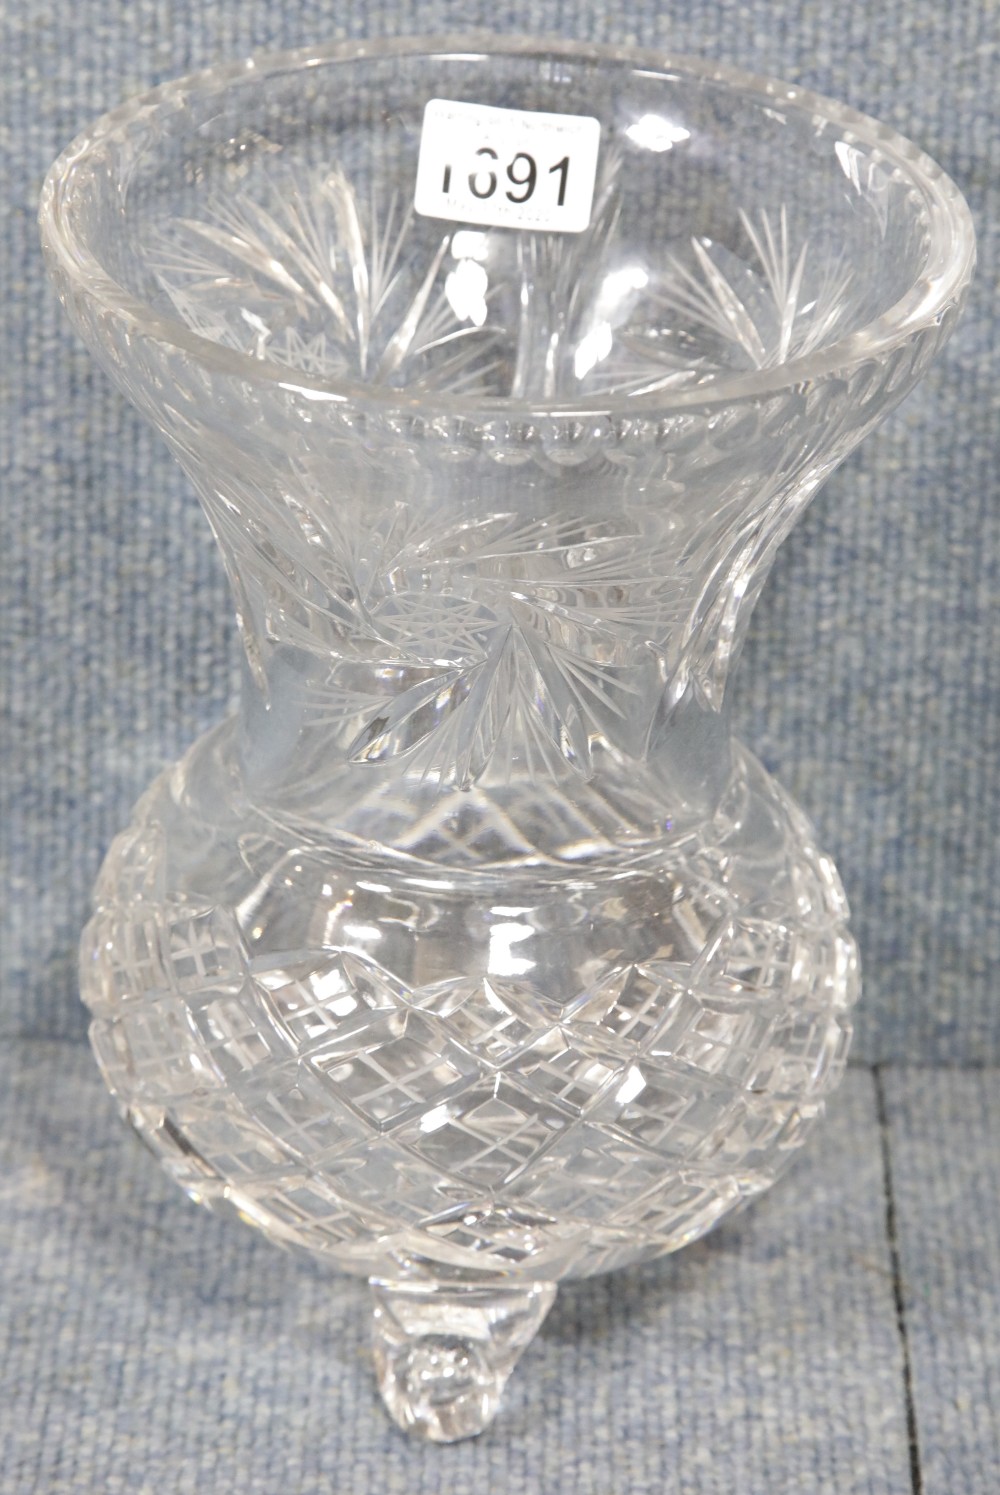 Large cut crystal three footed vase, H: 26 cm. P&P Group 2 (£18+VAT for the first lot and £2+VAT for